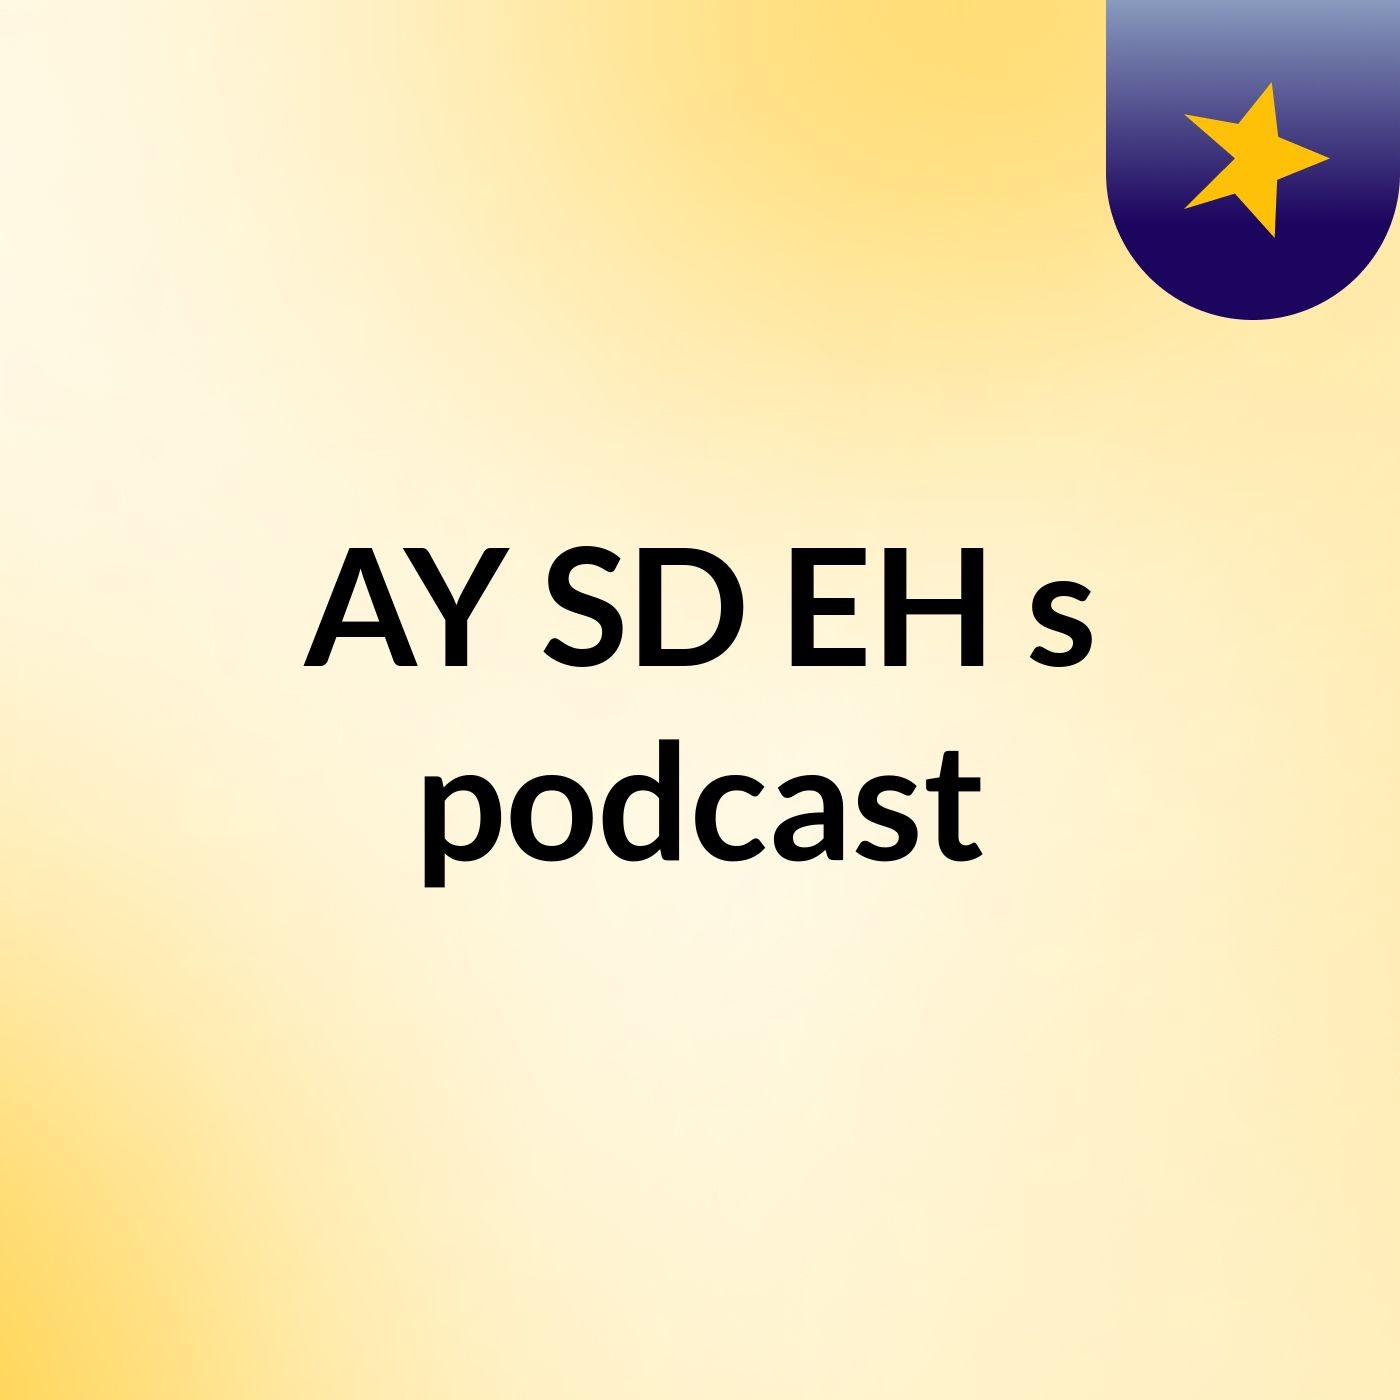 AY SD EH's podcast